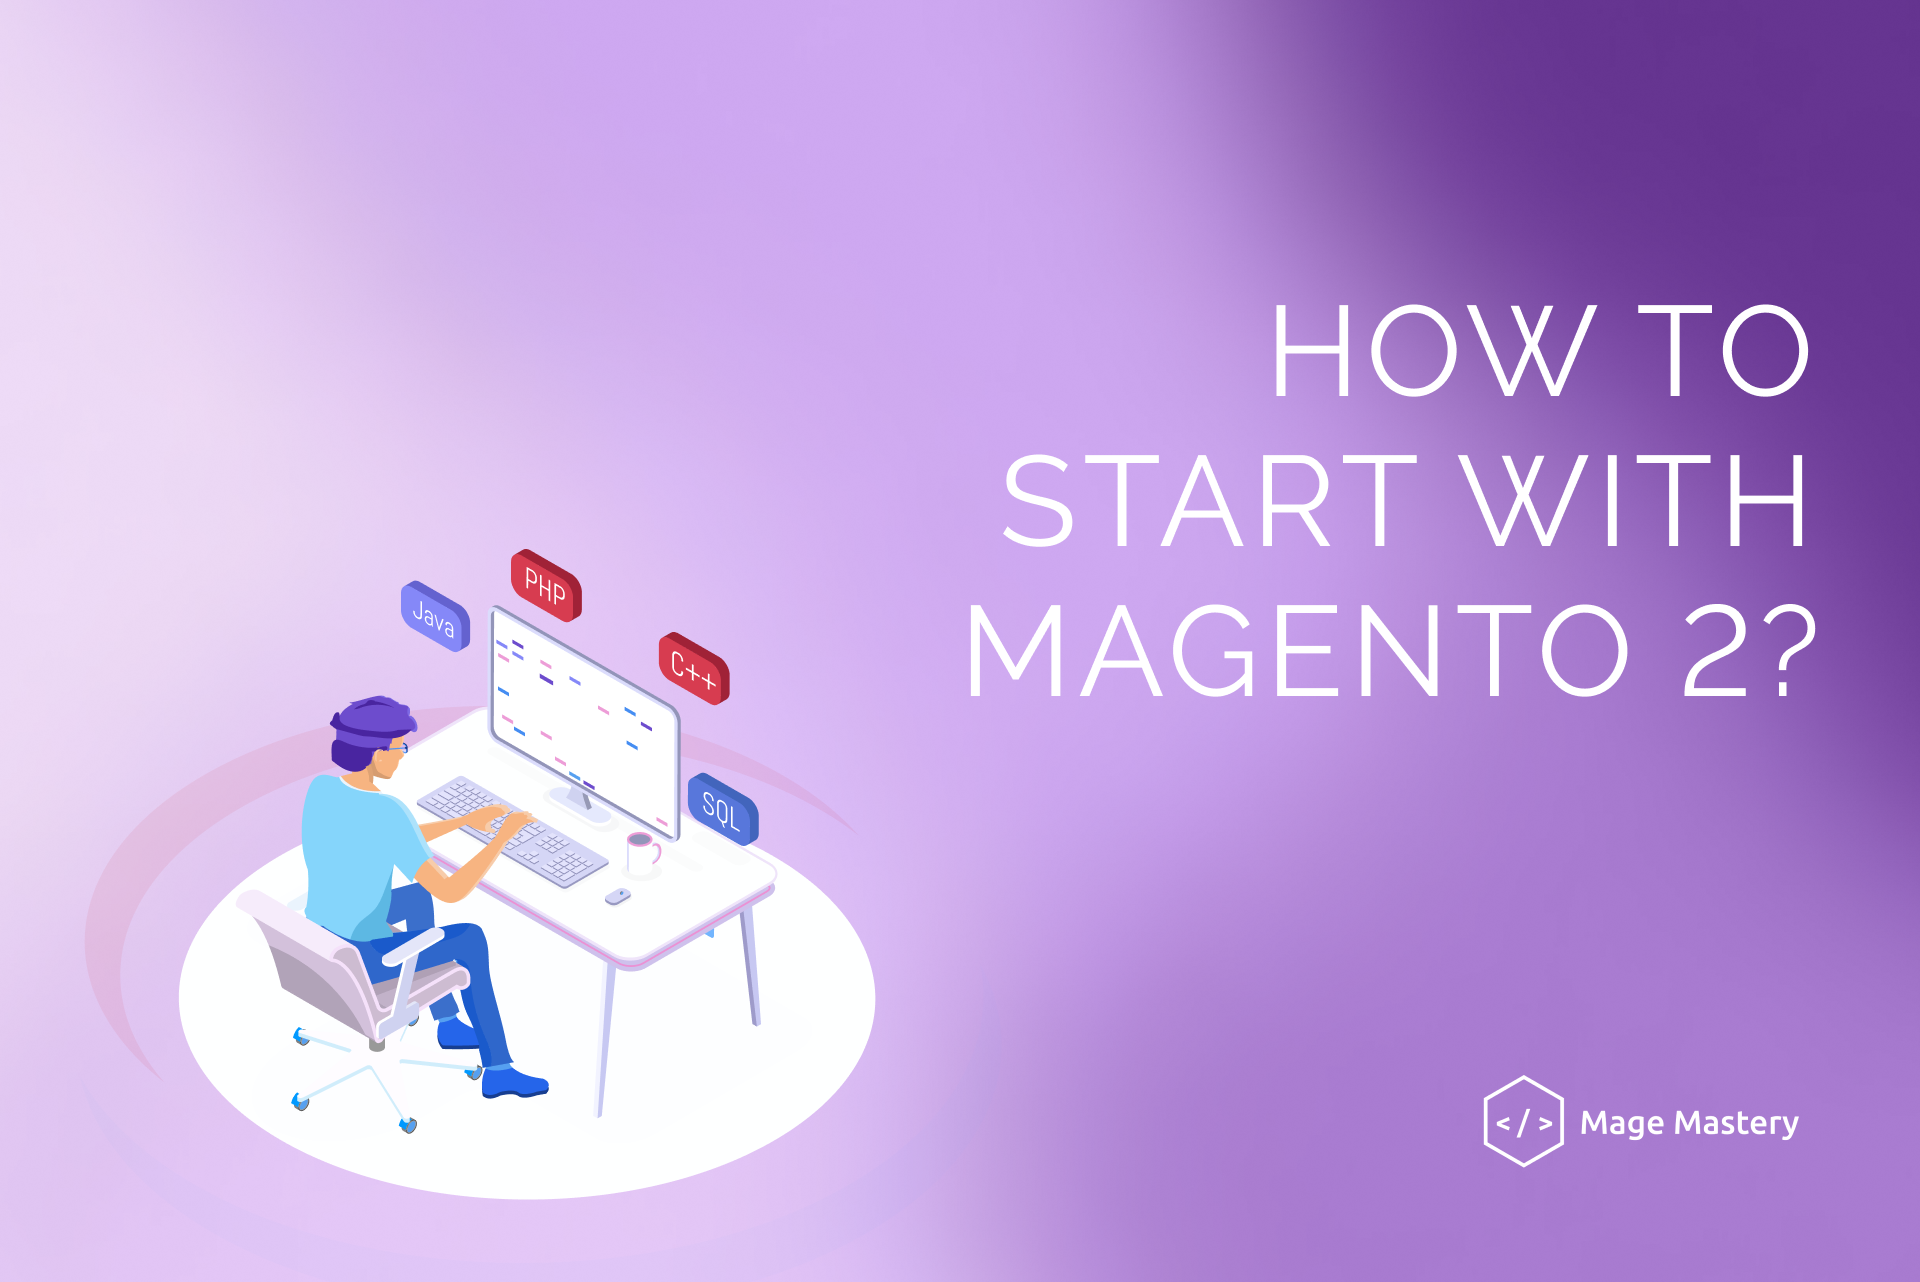 Getting Started with Magento 2